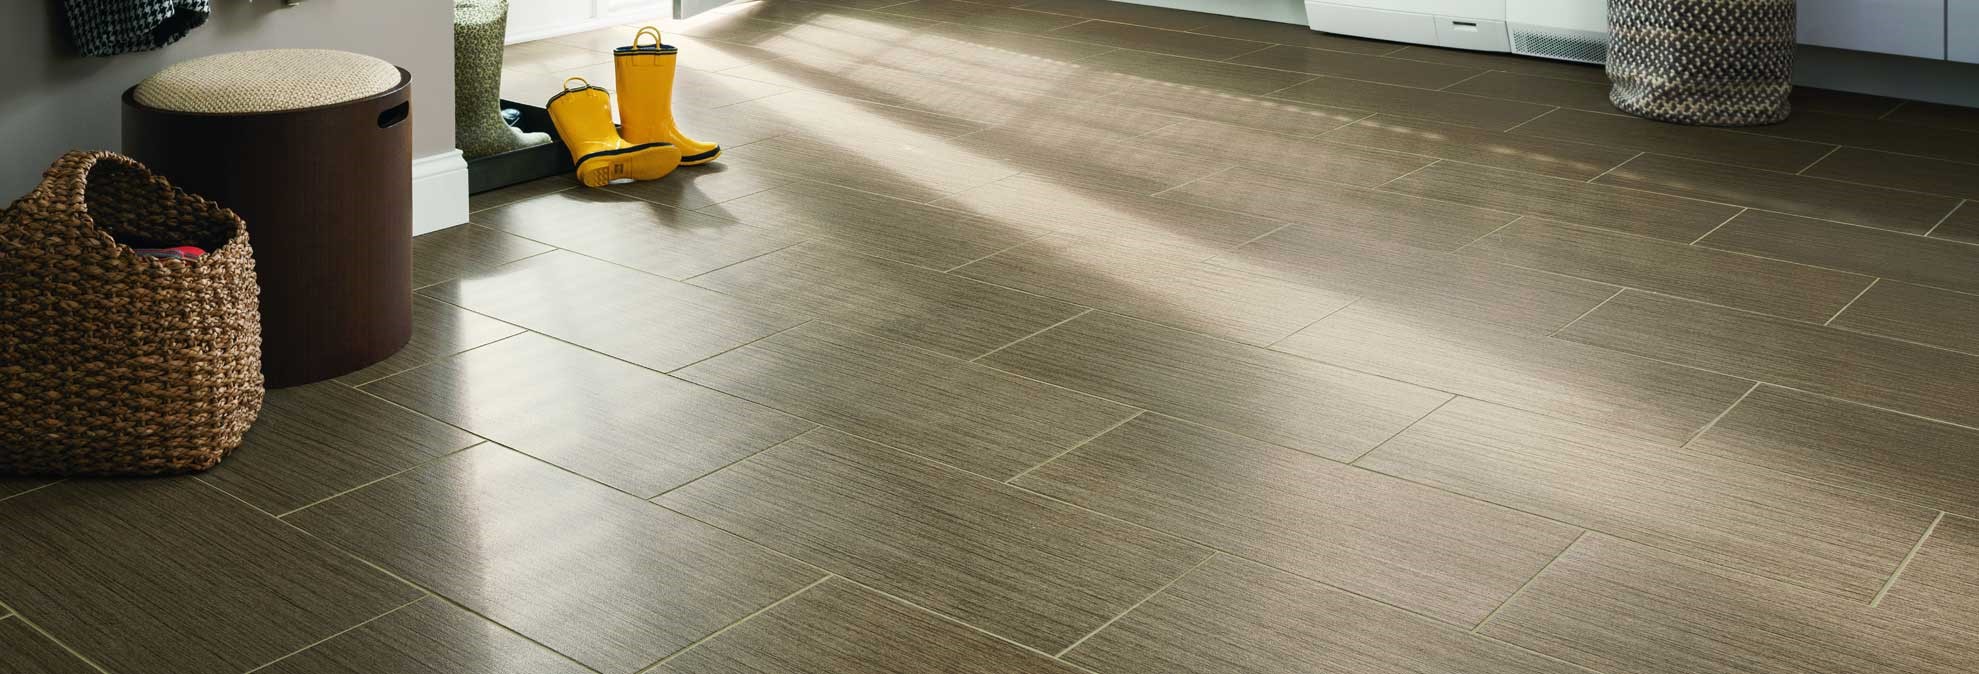 Choosing-the-Right-Flooring-for-Your-Home.jpg